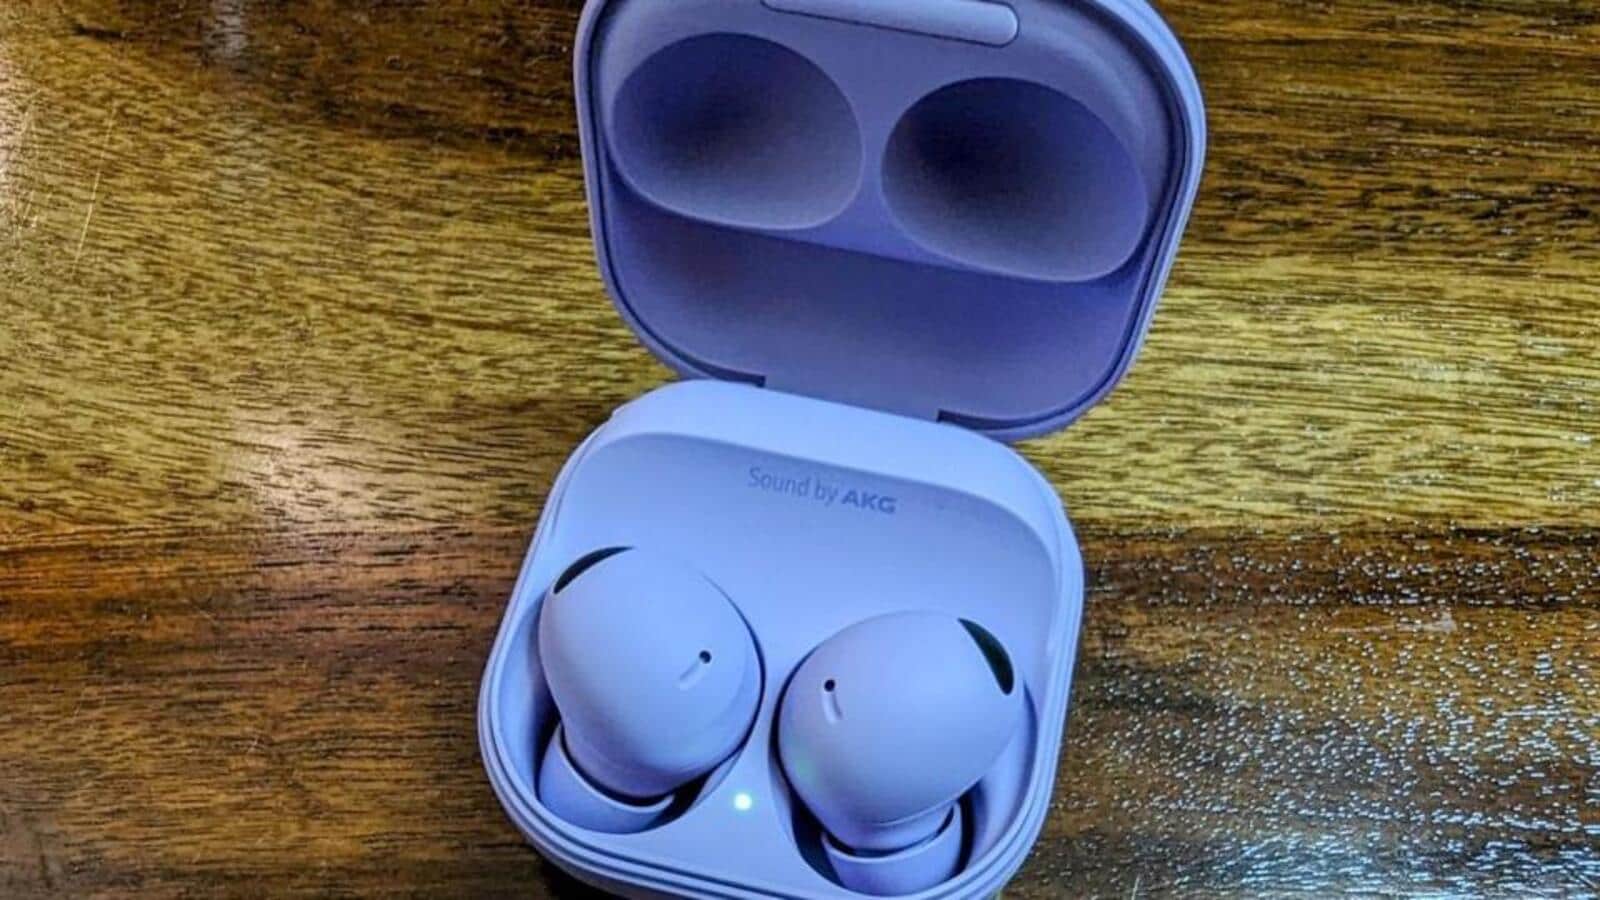 Samsung’s ecosystem possessiveness gets very serious with the Galaxy Buds2 Pro